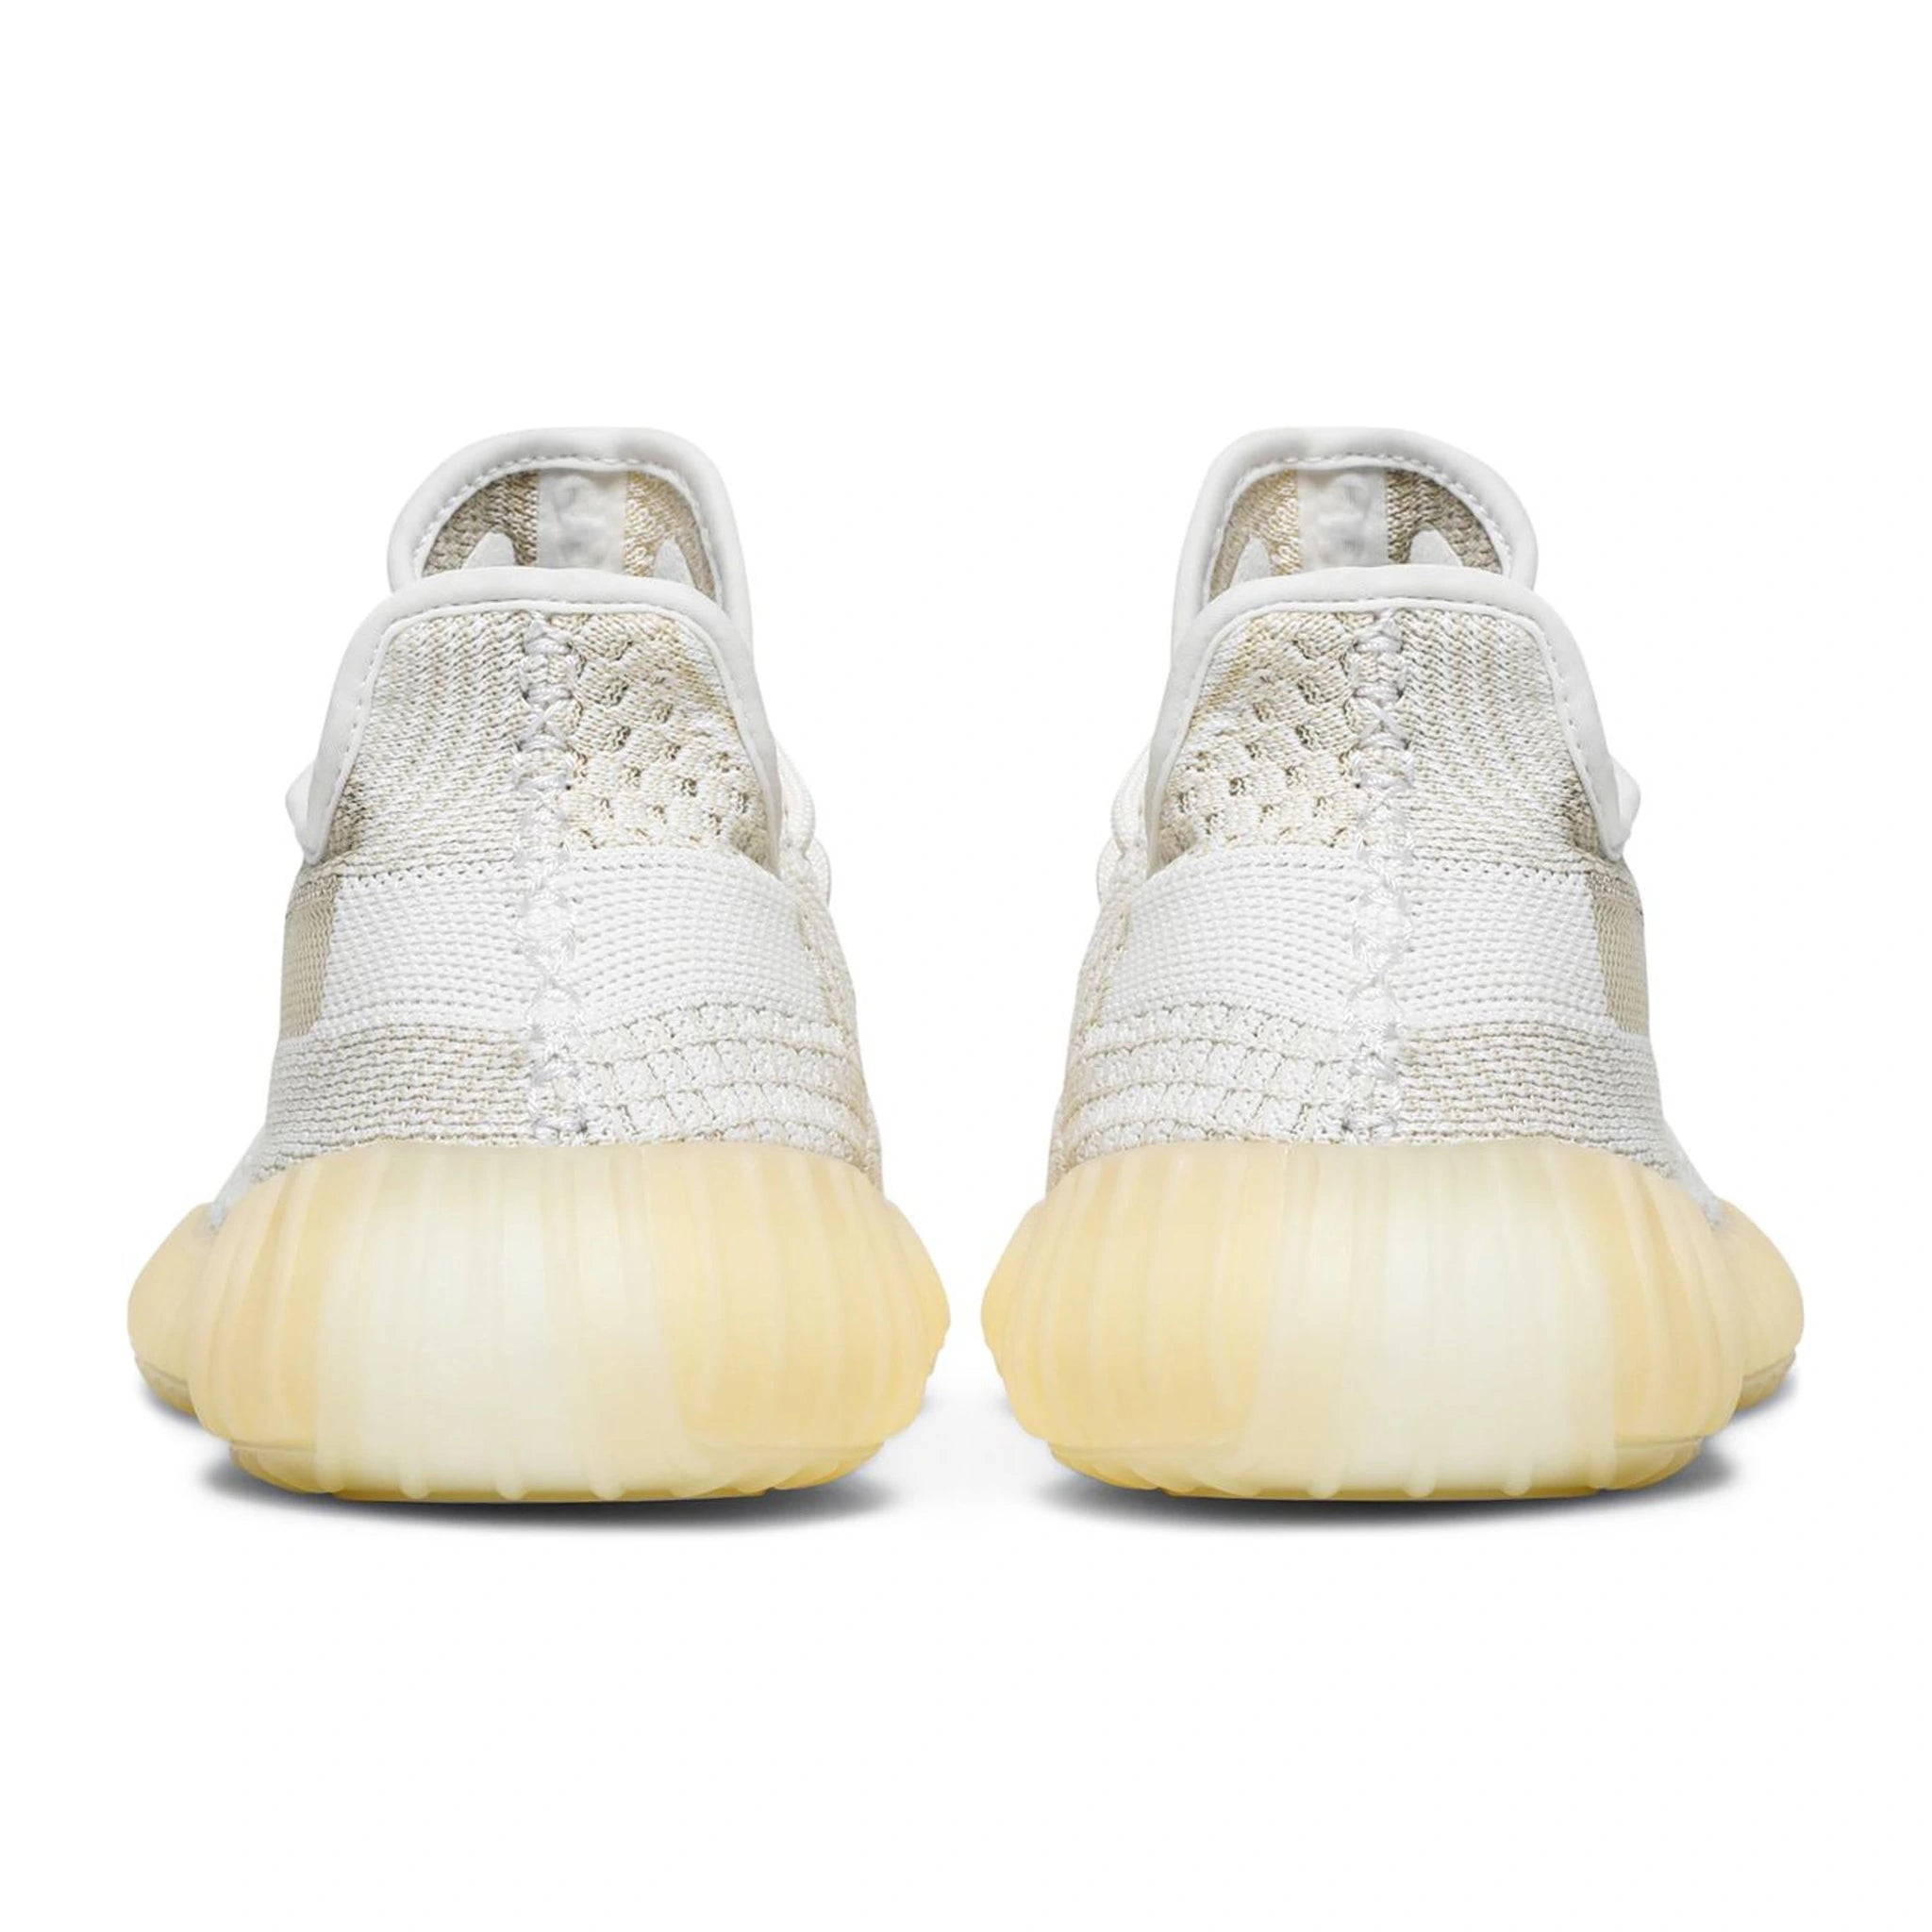 Back view of Adidas Yeezy Boost 350 V2 Natural FZ5246